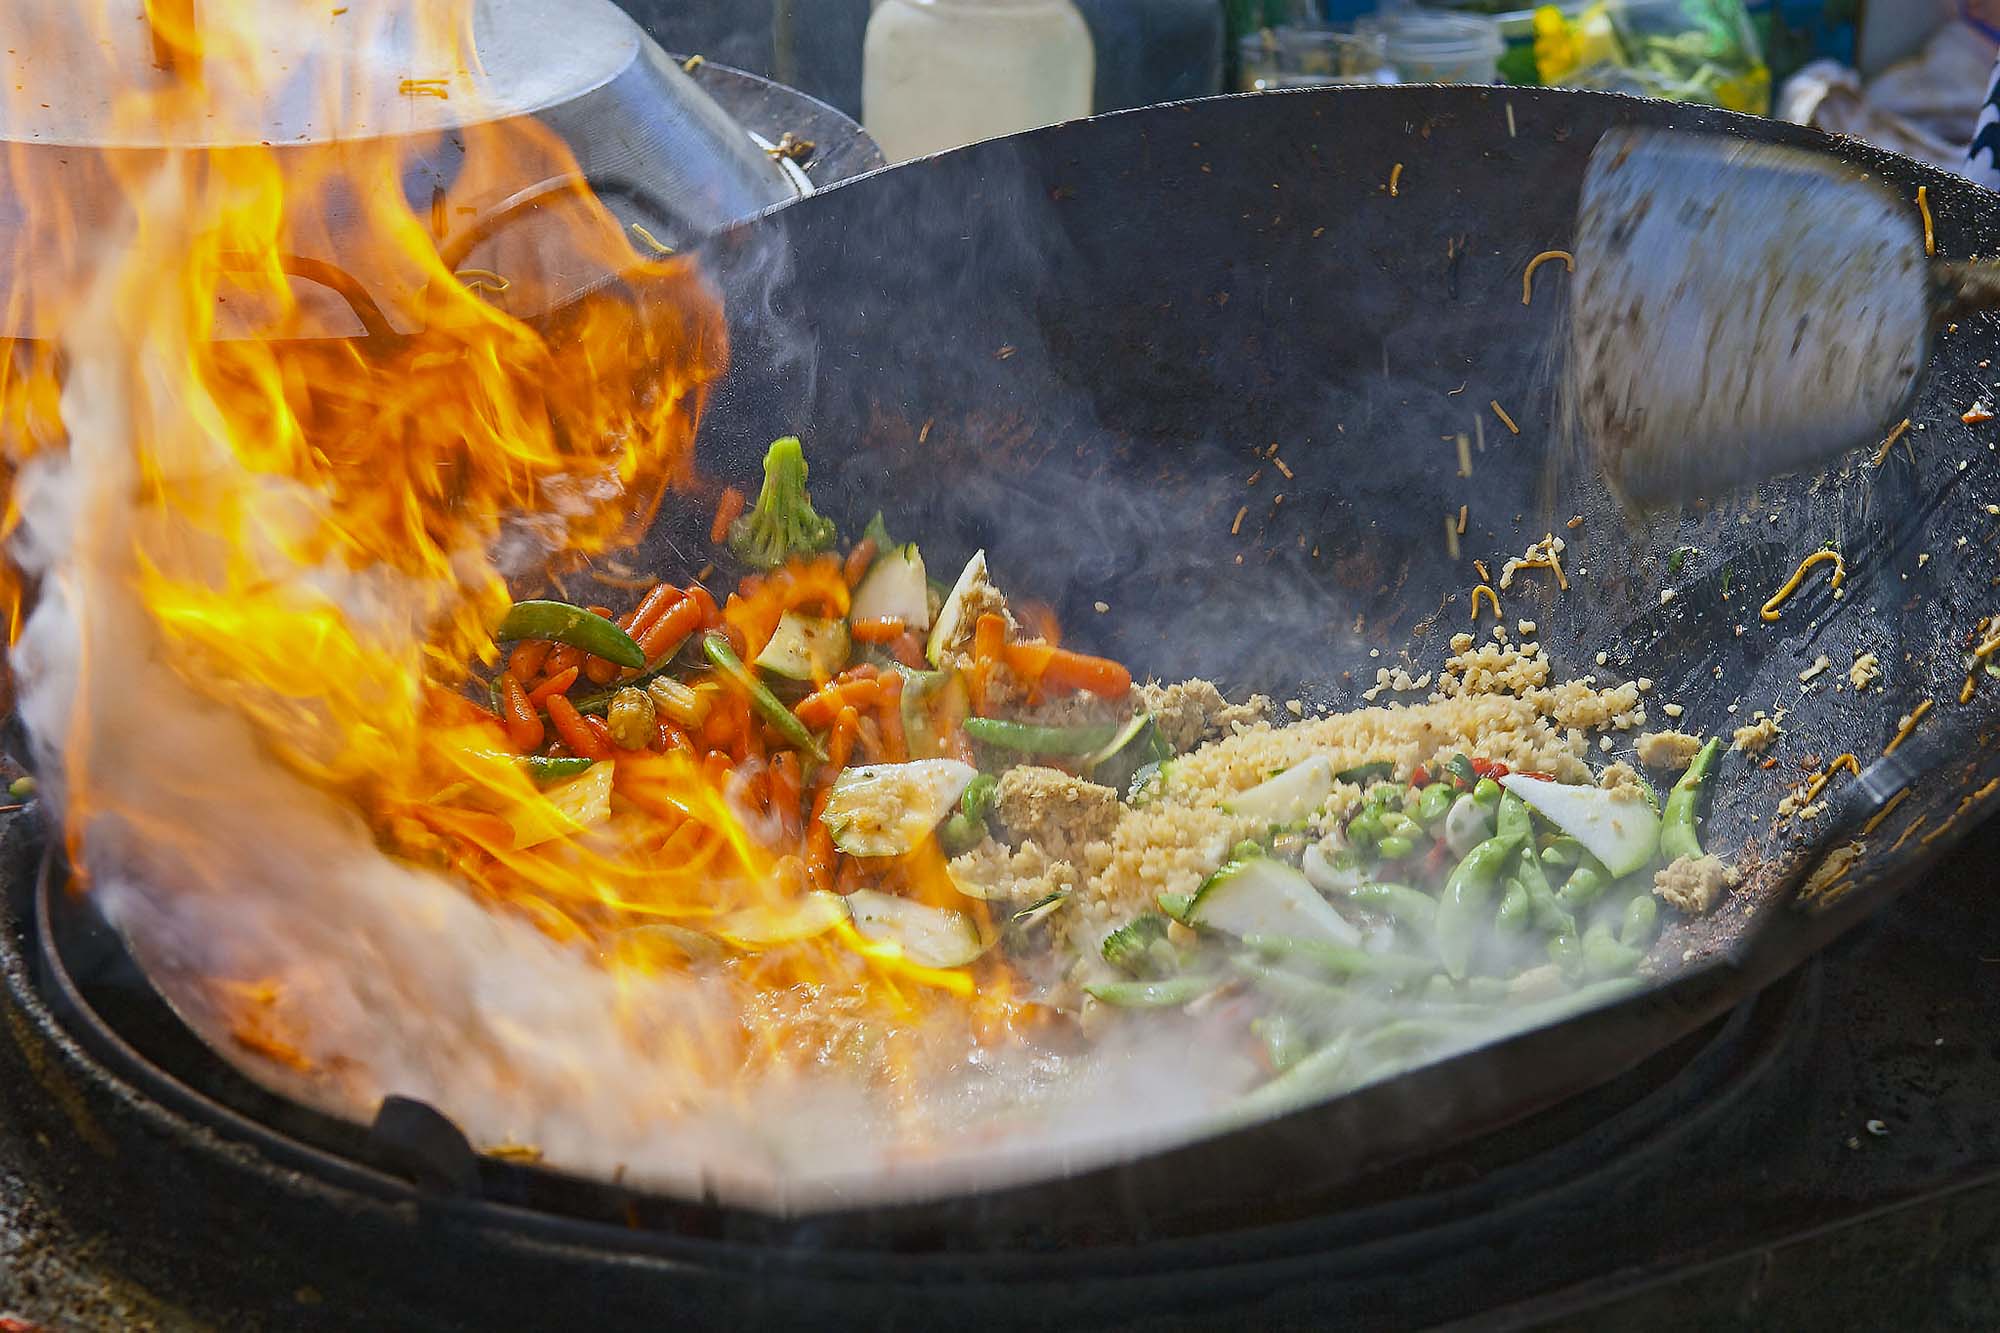 Outdoor wok burners with high BTU can flame up good like this one.